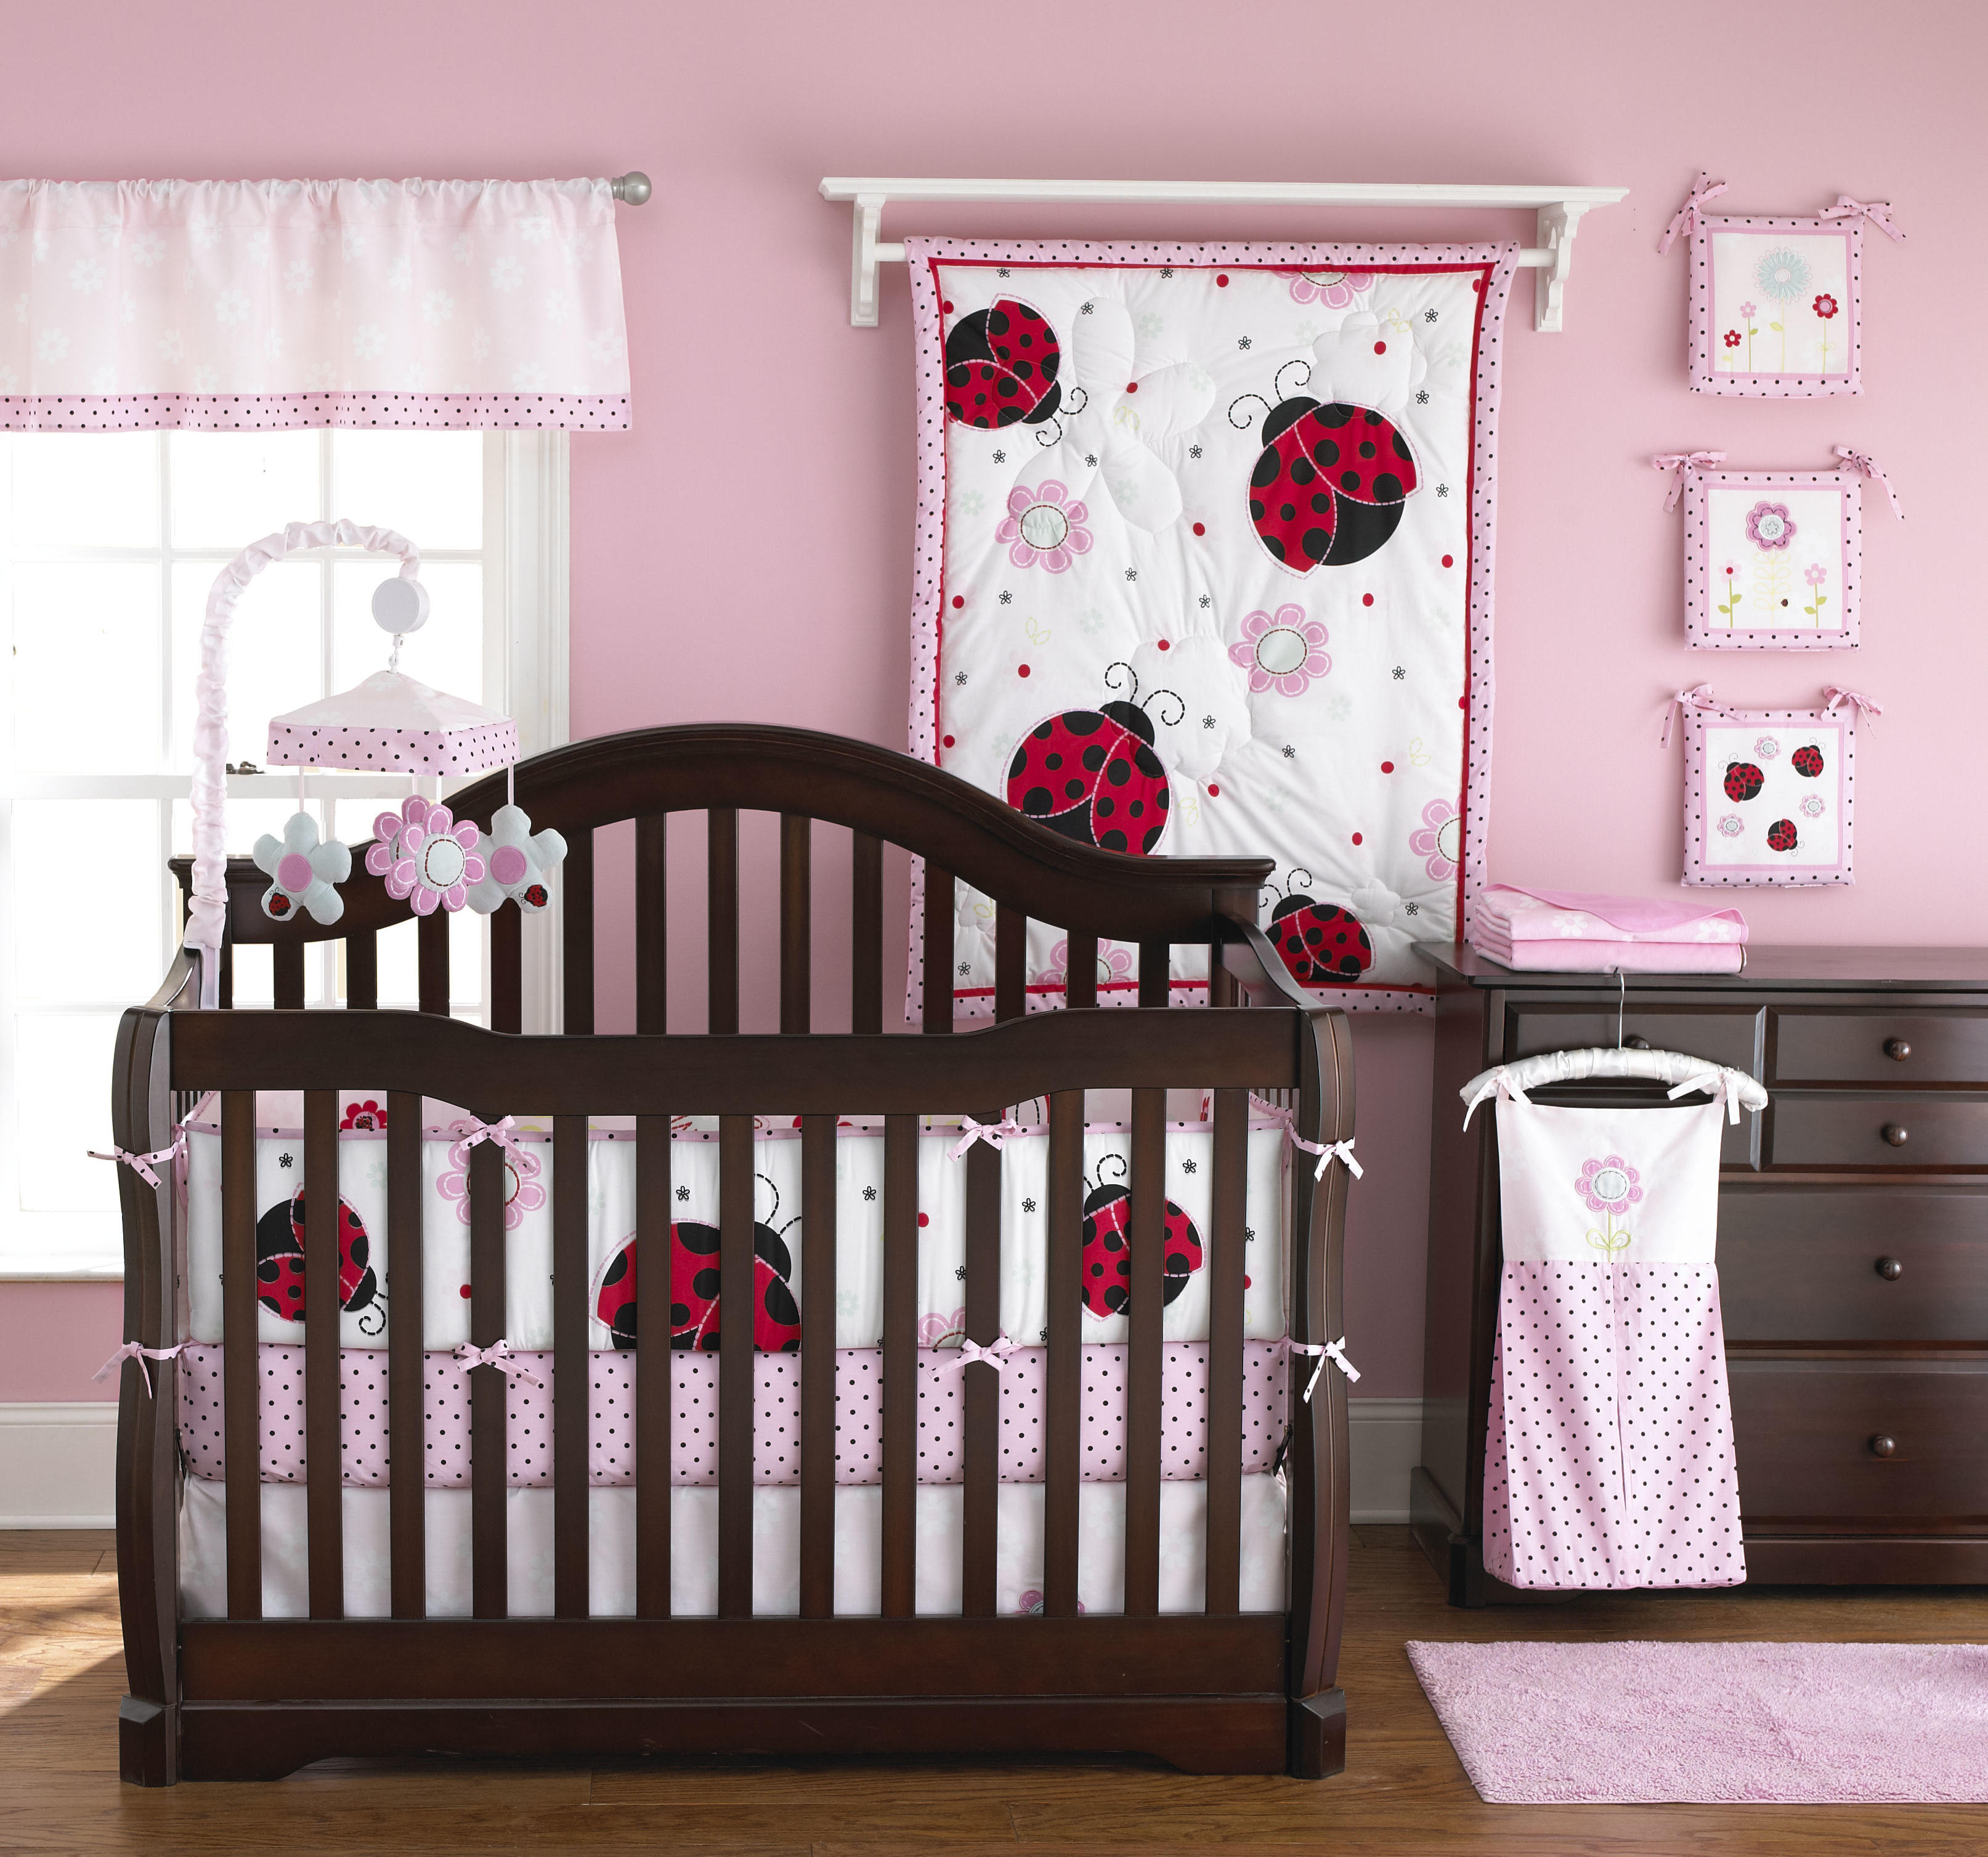 Lady Bug Baby Awesome Lady Bug Themed Pink Baby Girl Nursery Furnished With Brown Wooden Mini Crib Bedding With Floral Splash Kids Room  Astonishing Mini Crib Bedding Designed In Minimalist Model For Mansion